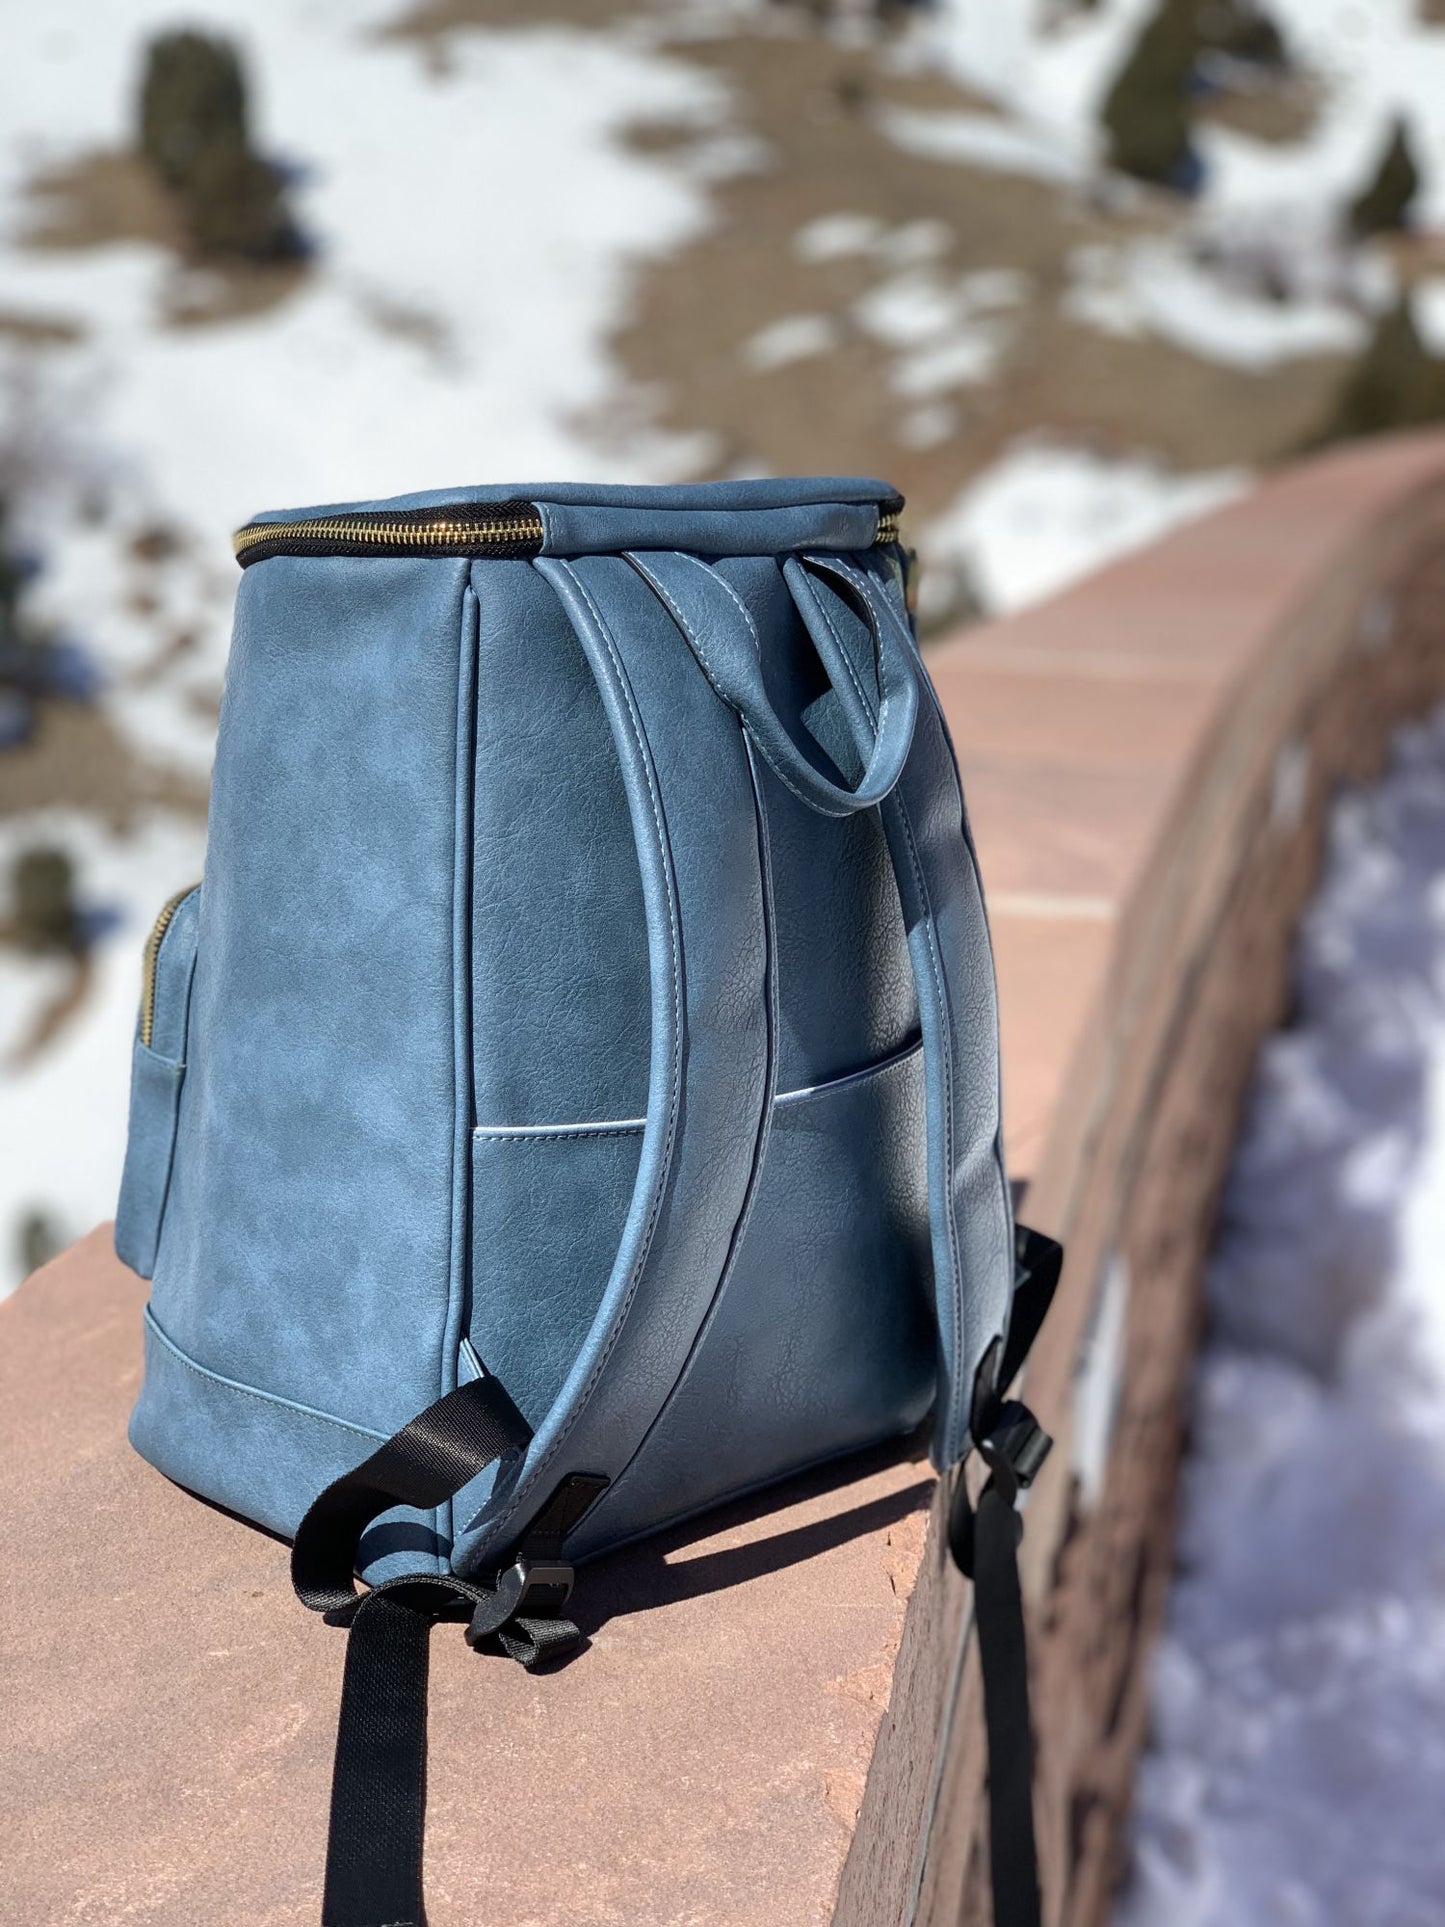 NiceAces’ insulated leakproof and waterproof backpack cooler